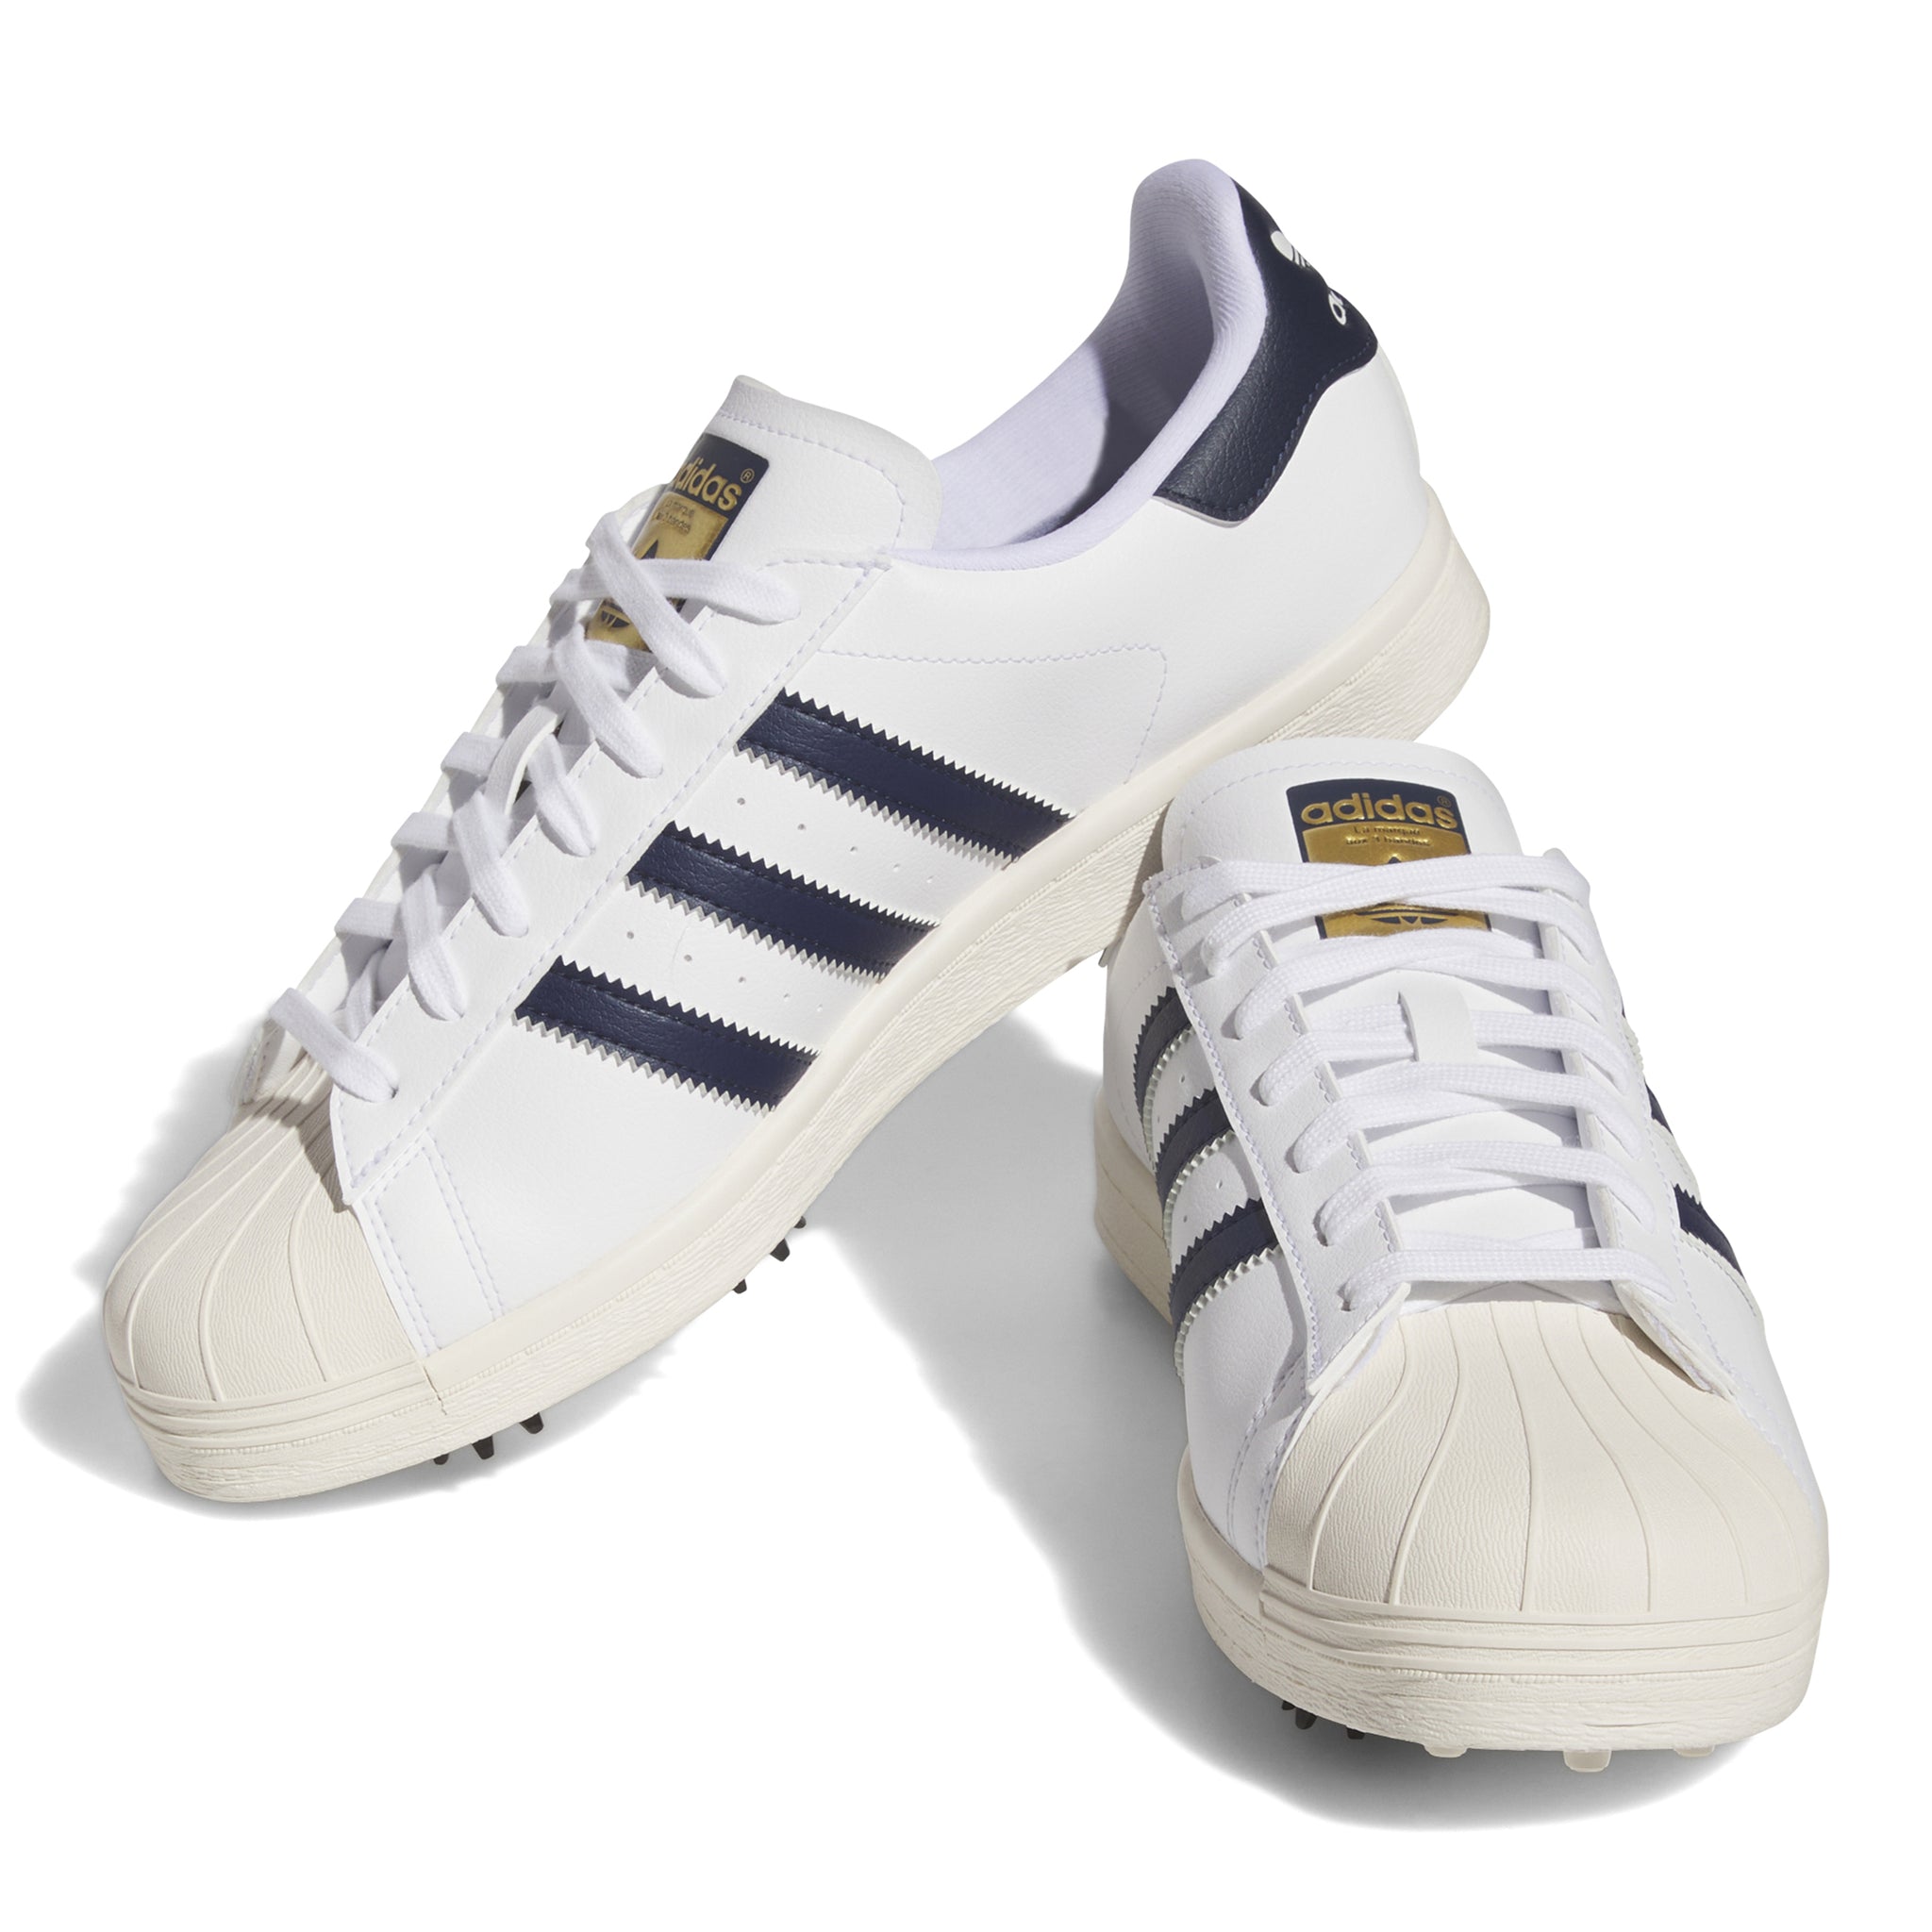 adidas Superstar Golf Shoes ID5003 White Collegiate Navy Off White ...